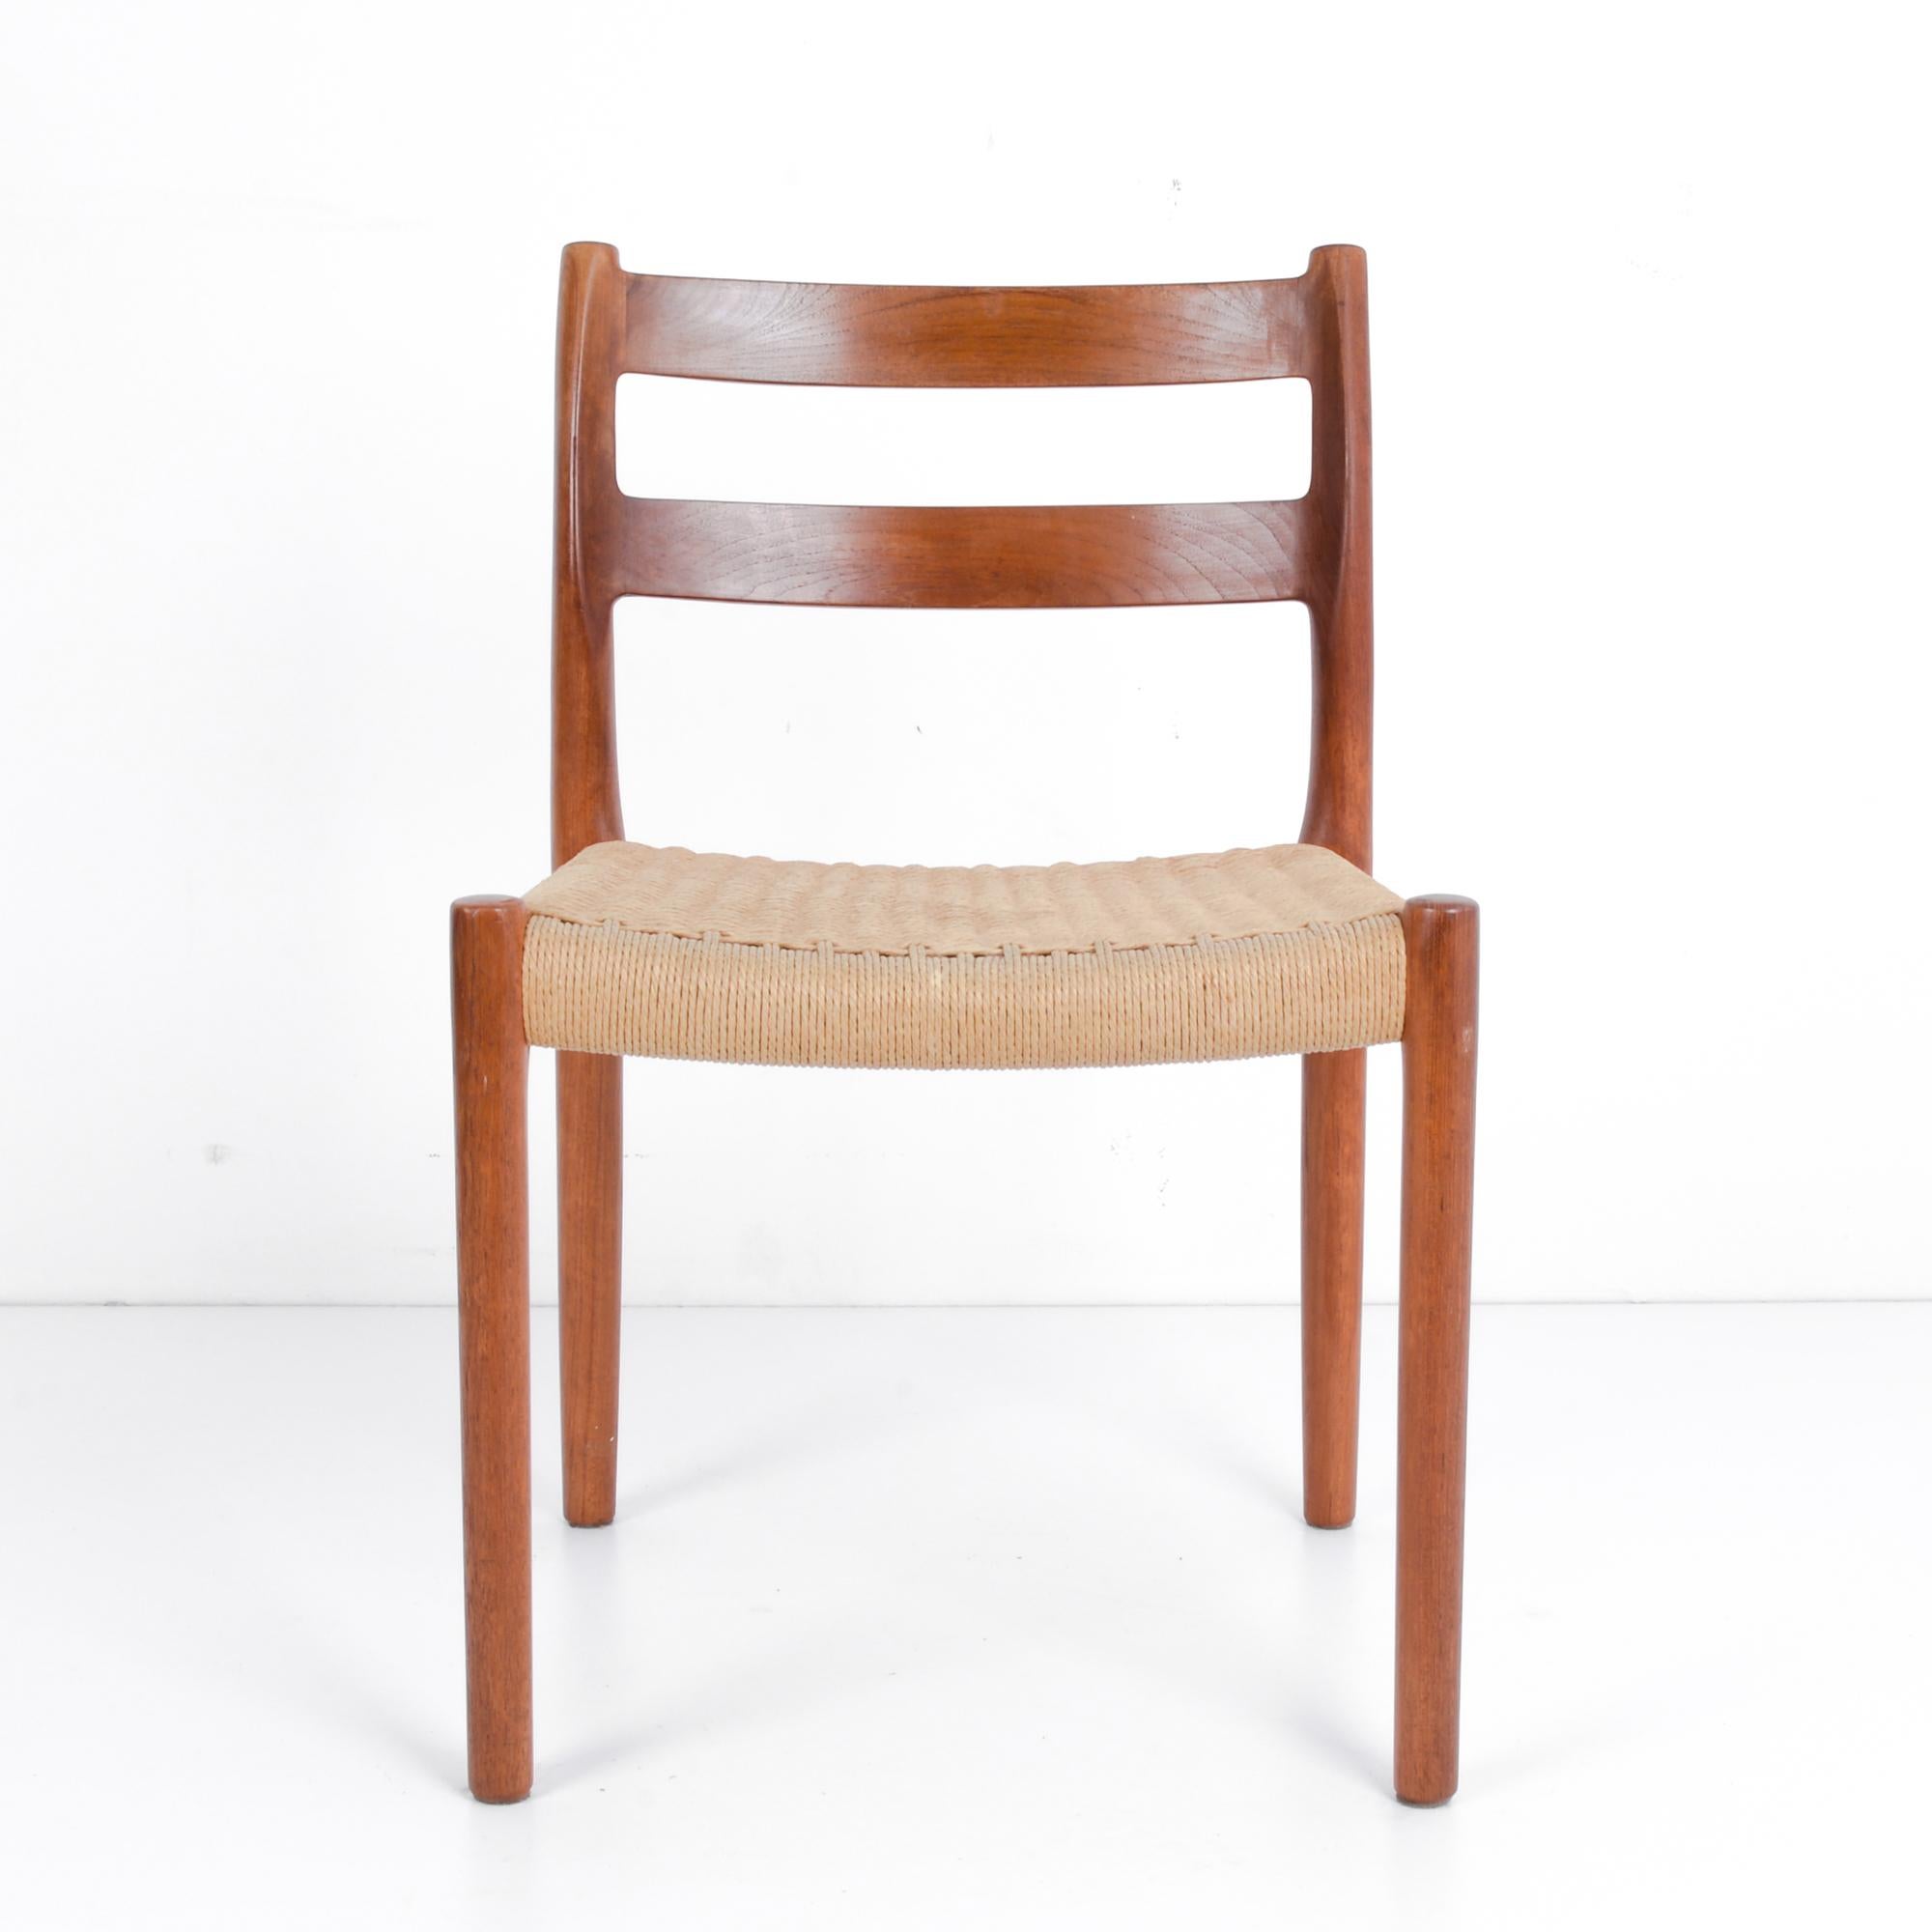 A vintage teak chair from celebrated Danish furniture designer Arne Hovmand-Olsen, produced in Denmark circa 1960. Well-known for his designs in the Scandinavian Modern Style, Hovmand-Olsen’s pieces are characterized by the vitality of their curves